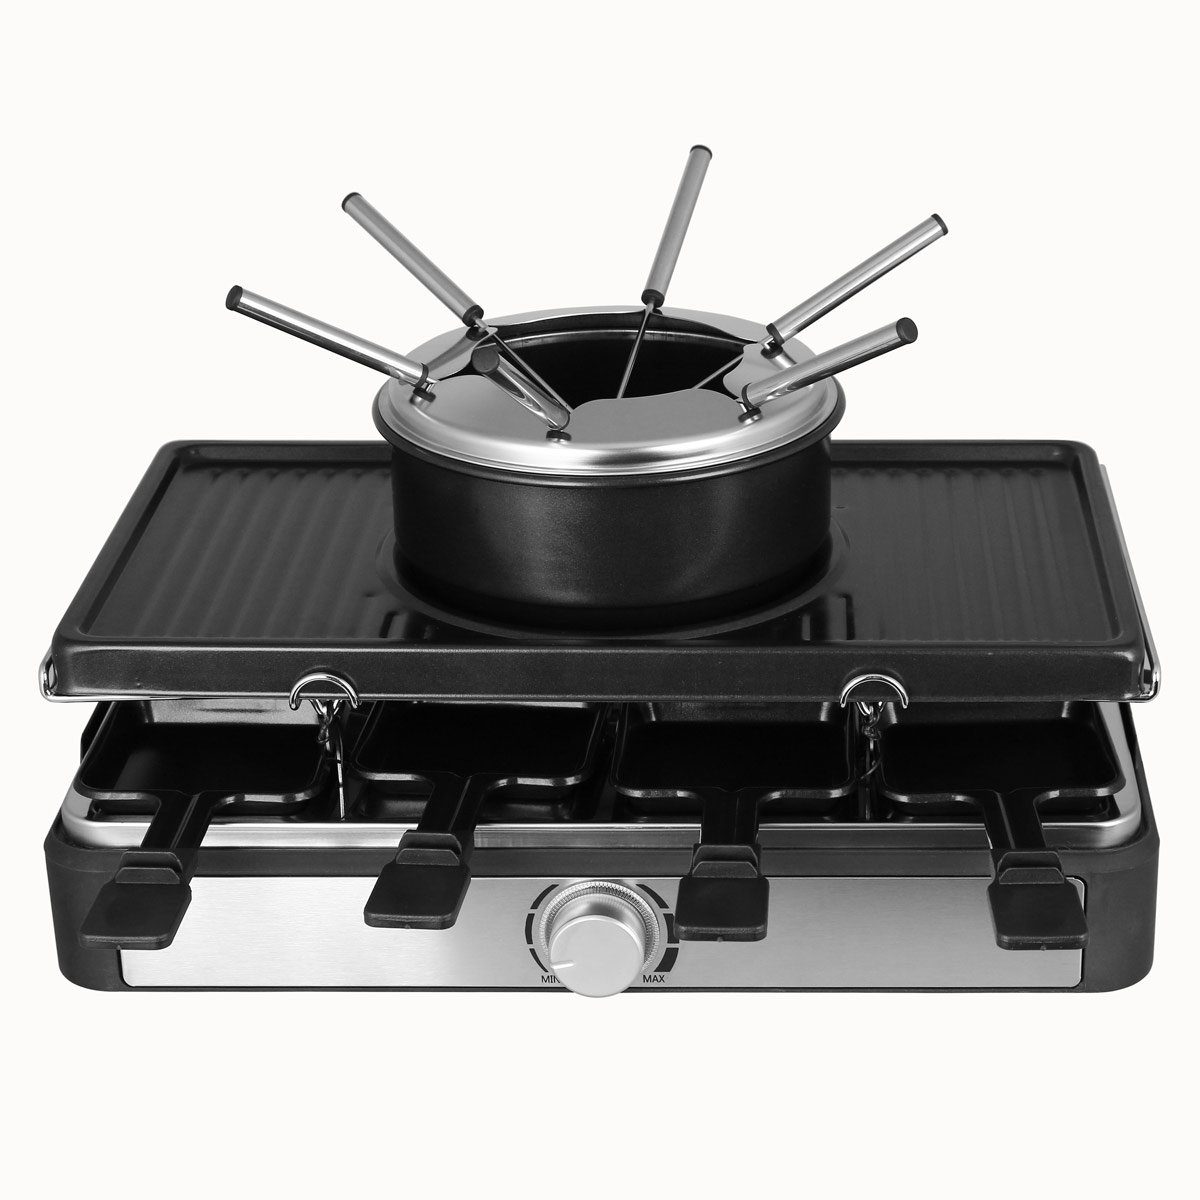 Emerio Raclette RG 124930, 3 in 1 Raclette, Grill und Fondue Set, 1300 W | 